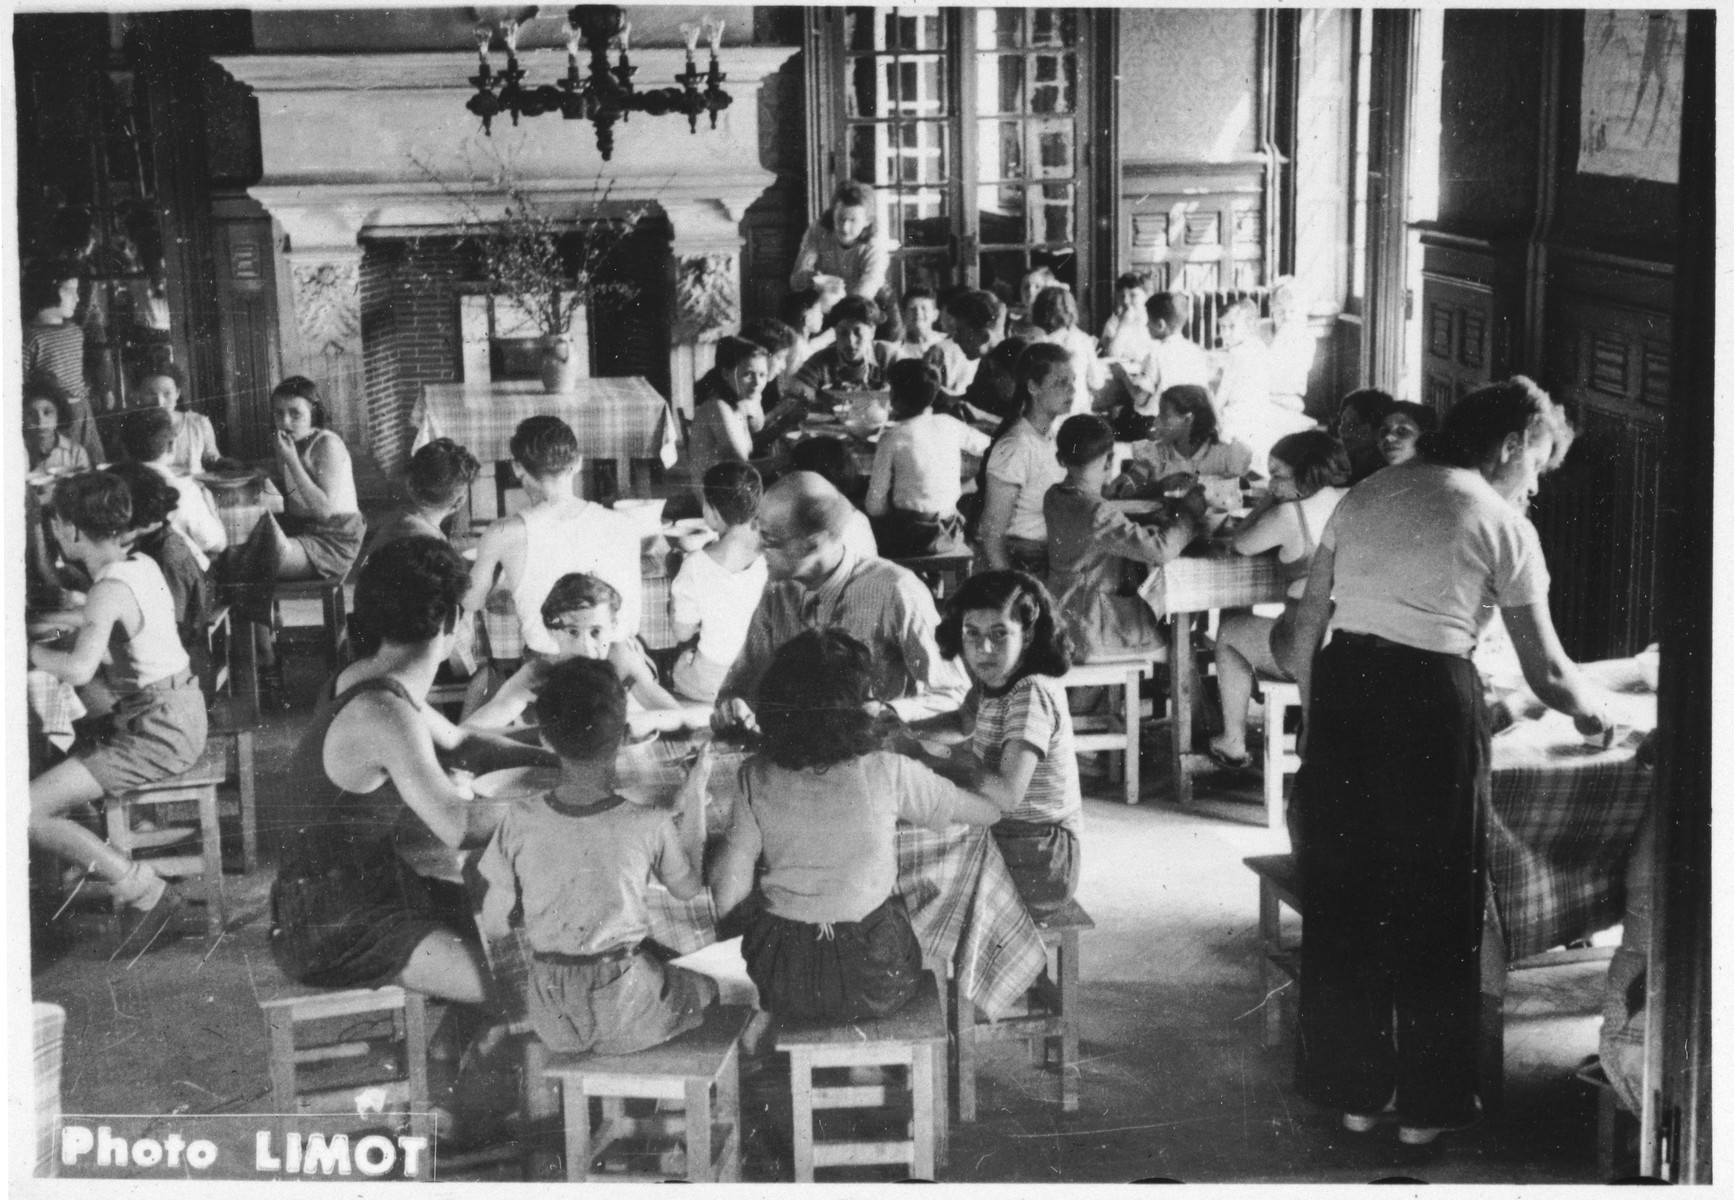 Children and counselors gather for a meal in the dining room of the Mehoncourt children's home.